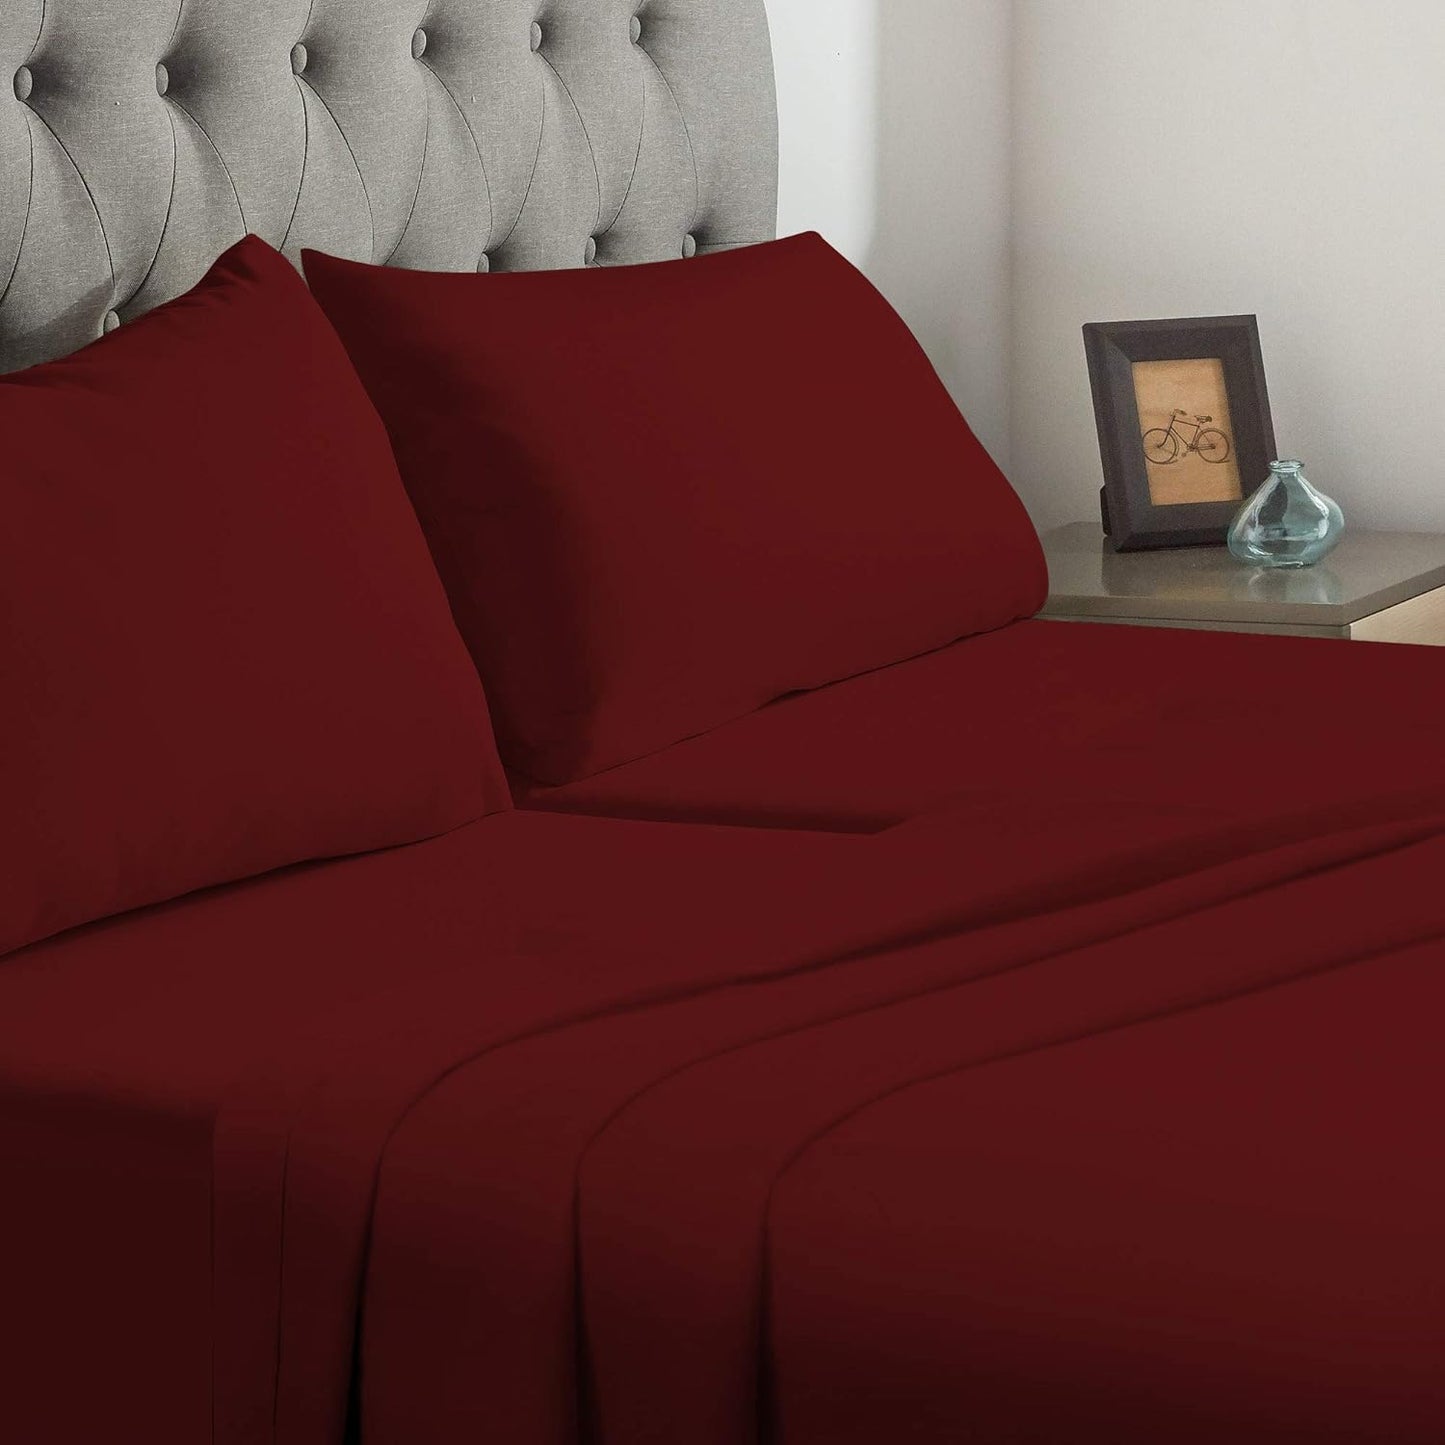 Split California King Sheet Set for Adjustable Beds - Burgundy Solid, 800 Thread Count 100% Egyptian Cotton, Sateen Weave Comfortable - 5 Piece Set, 21" Deep Pocket with All Around Elastic